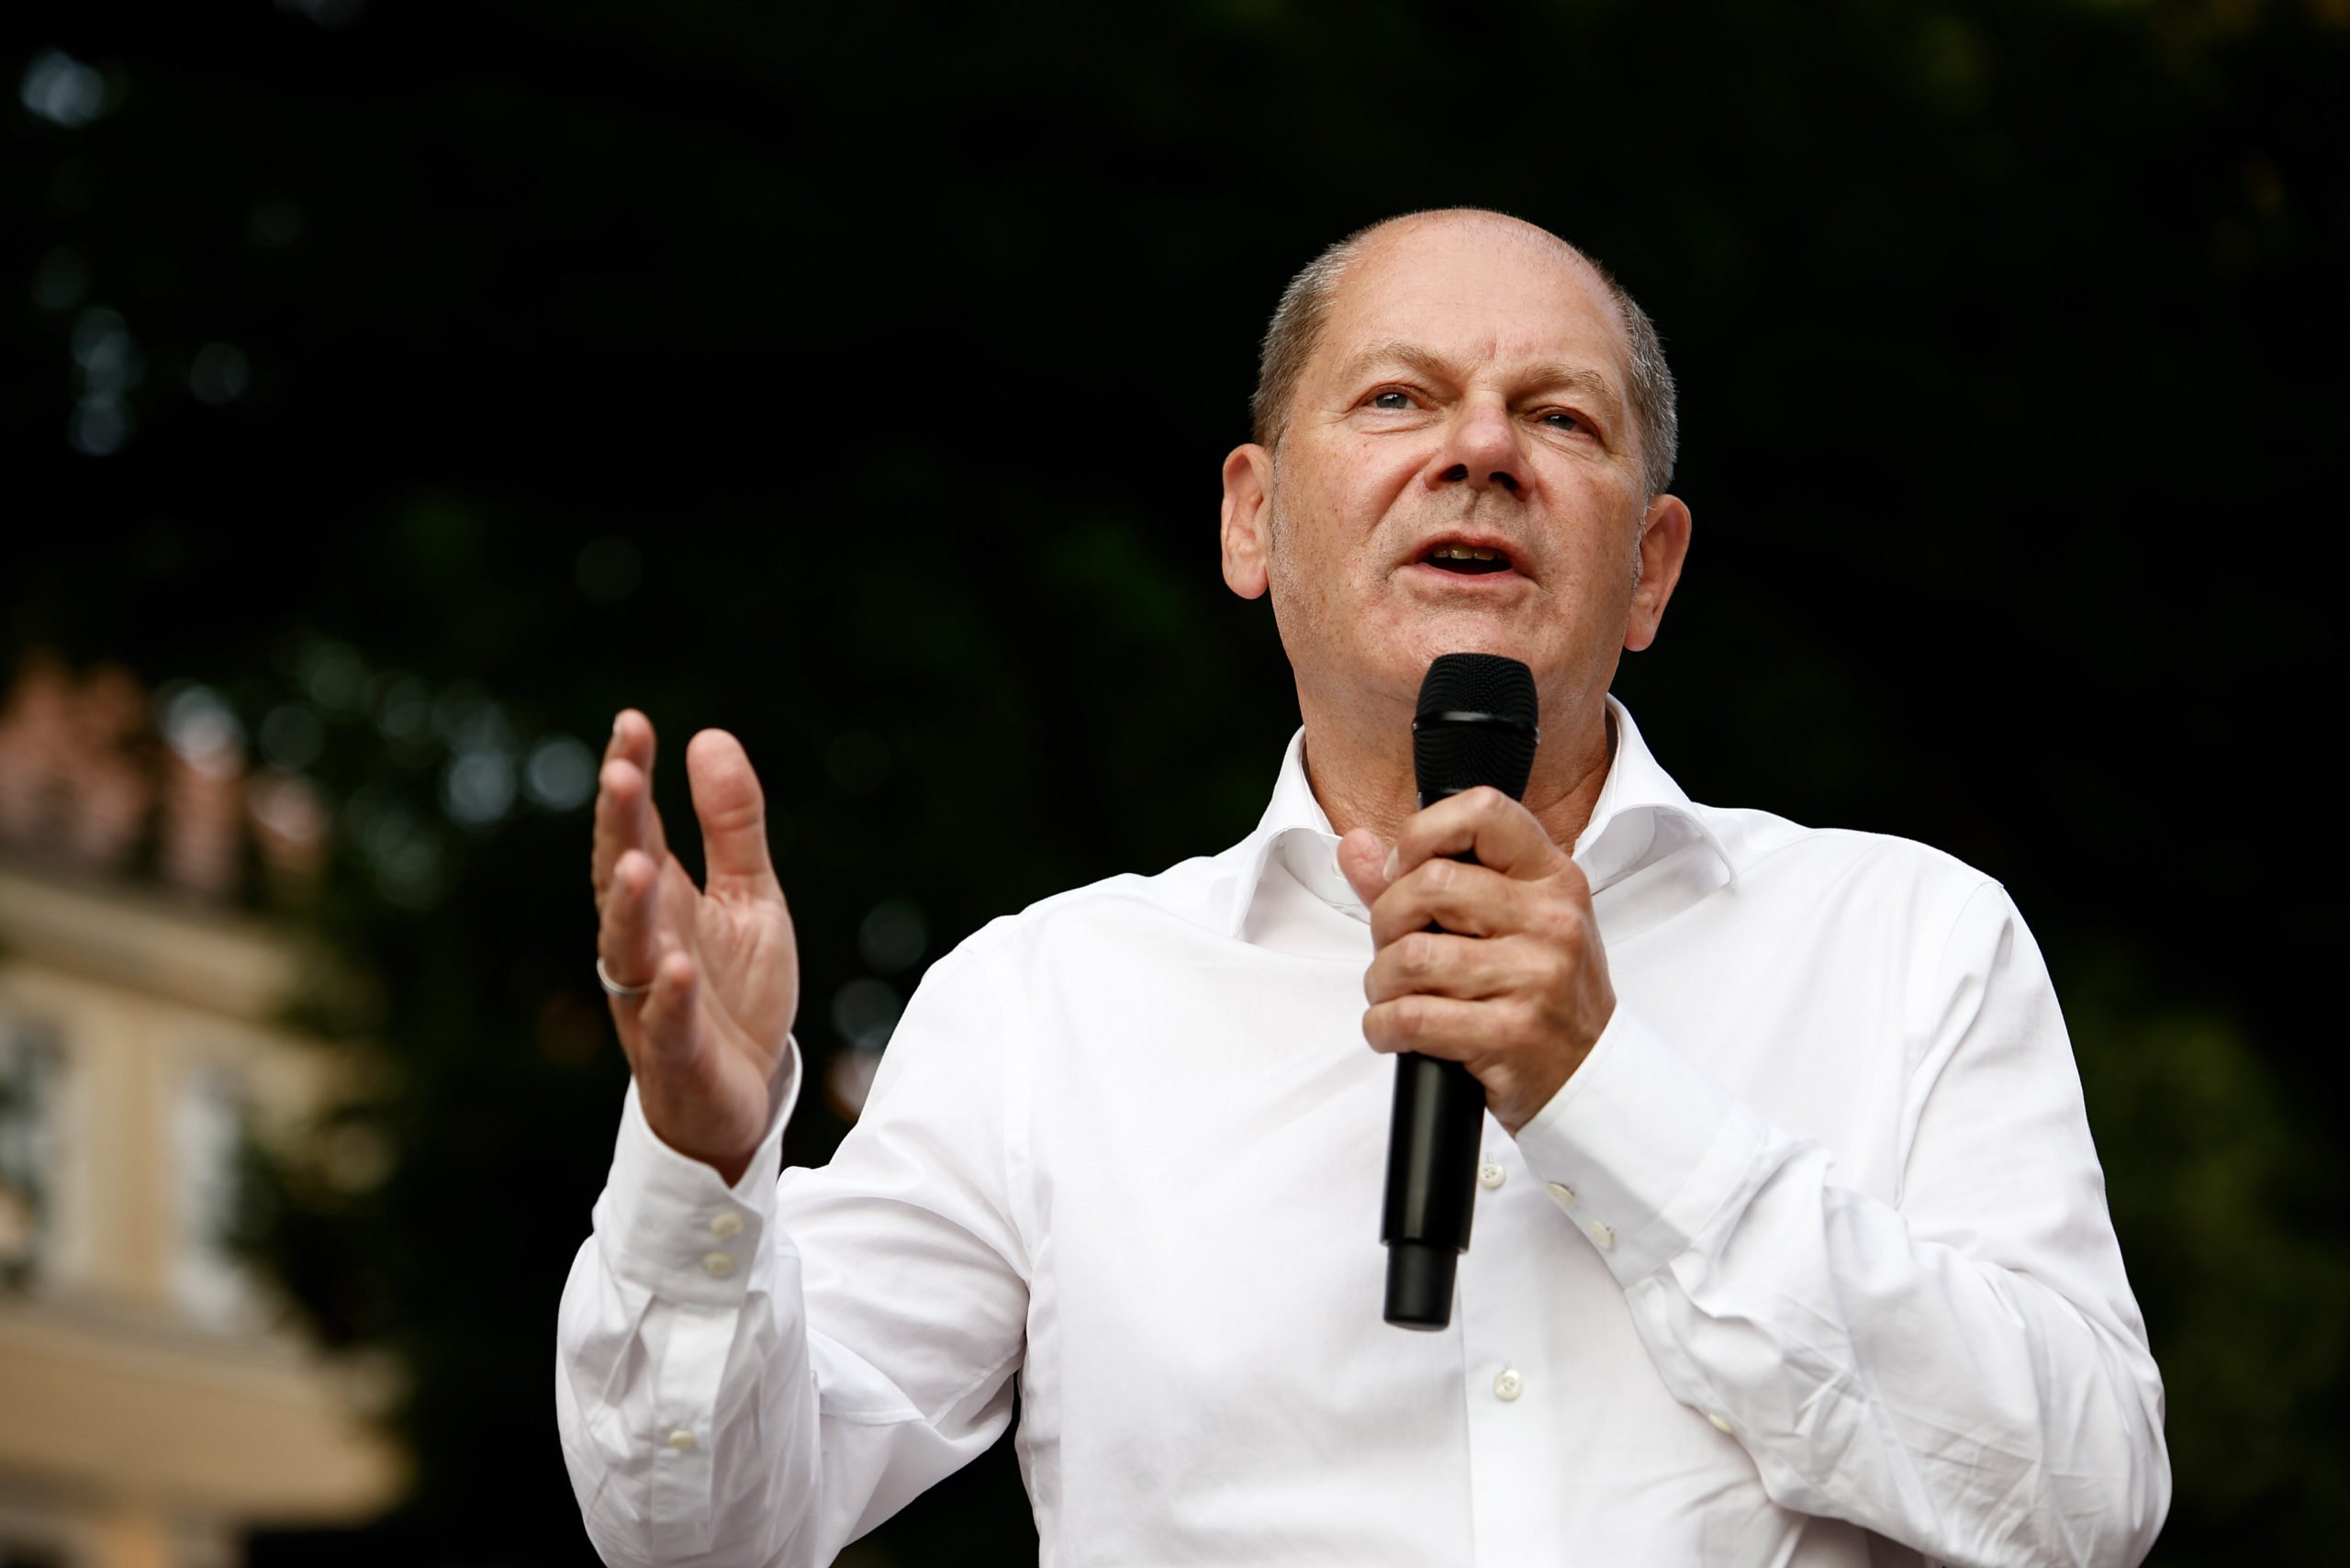 Germany's Scholz faces grilling over tax fraud scandal